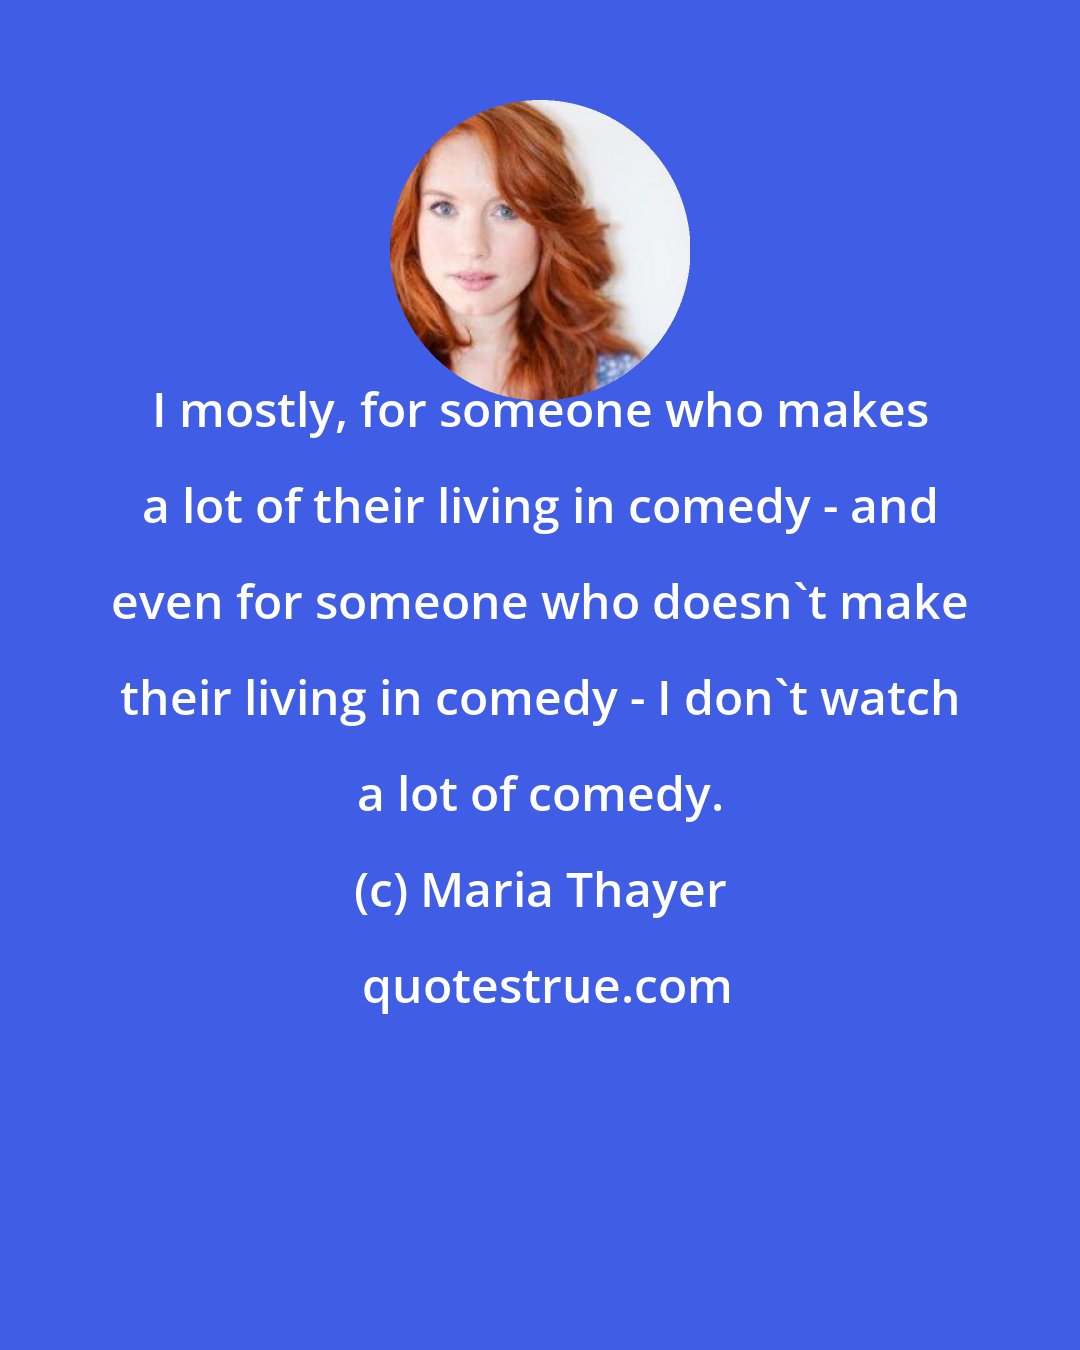 Maria Thayer: I mostly, for someone who makes a lot of their living in comedy - and even for someone who doesn't make their living in comedy - I don't watch a lot of comedy.